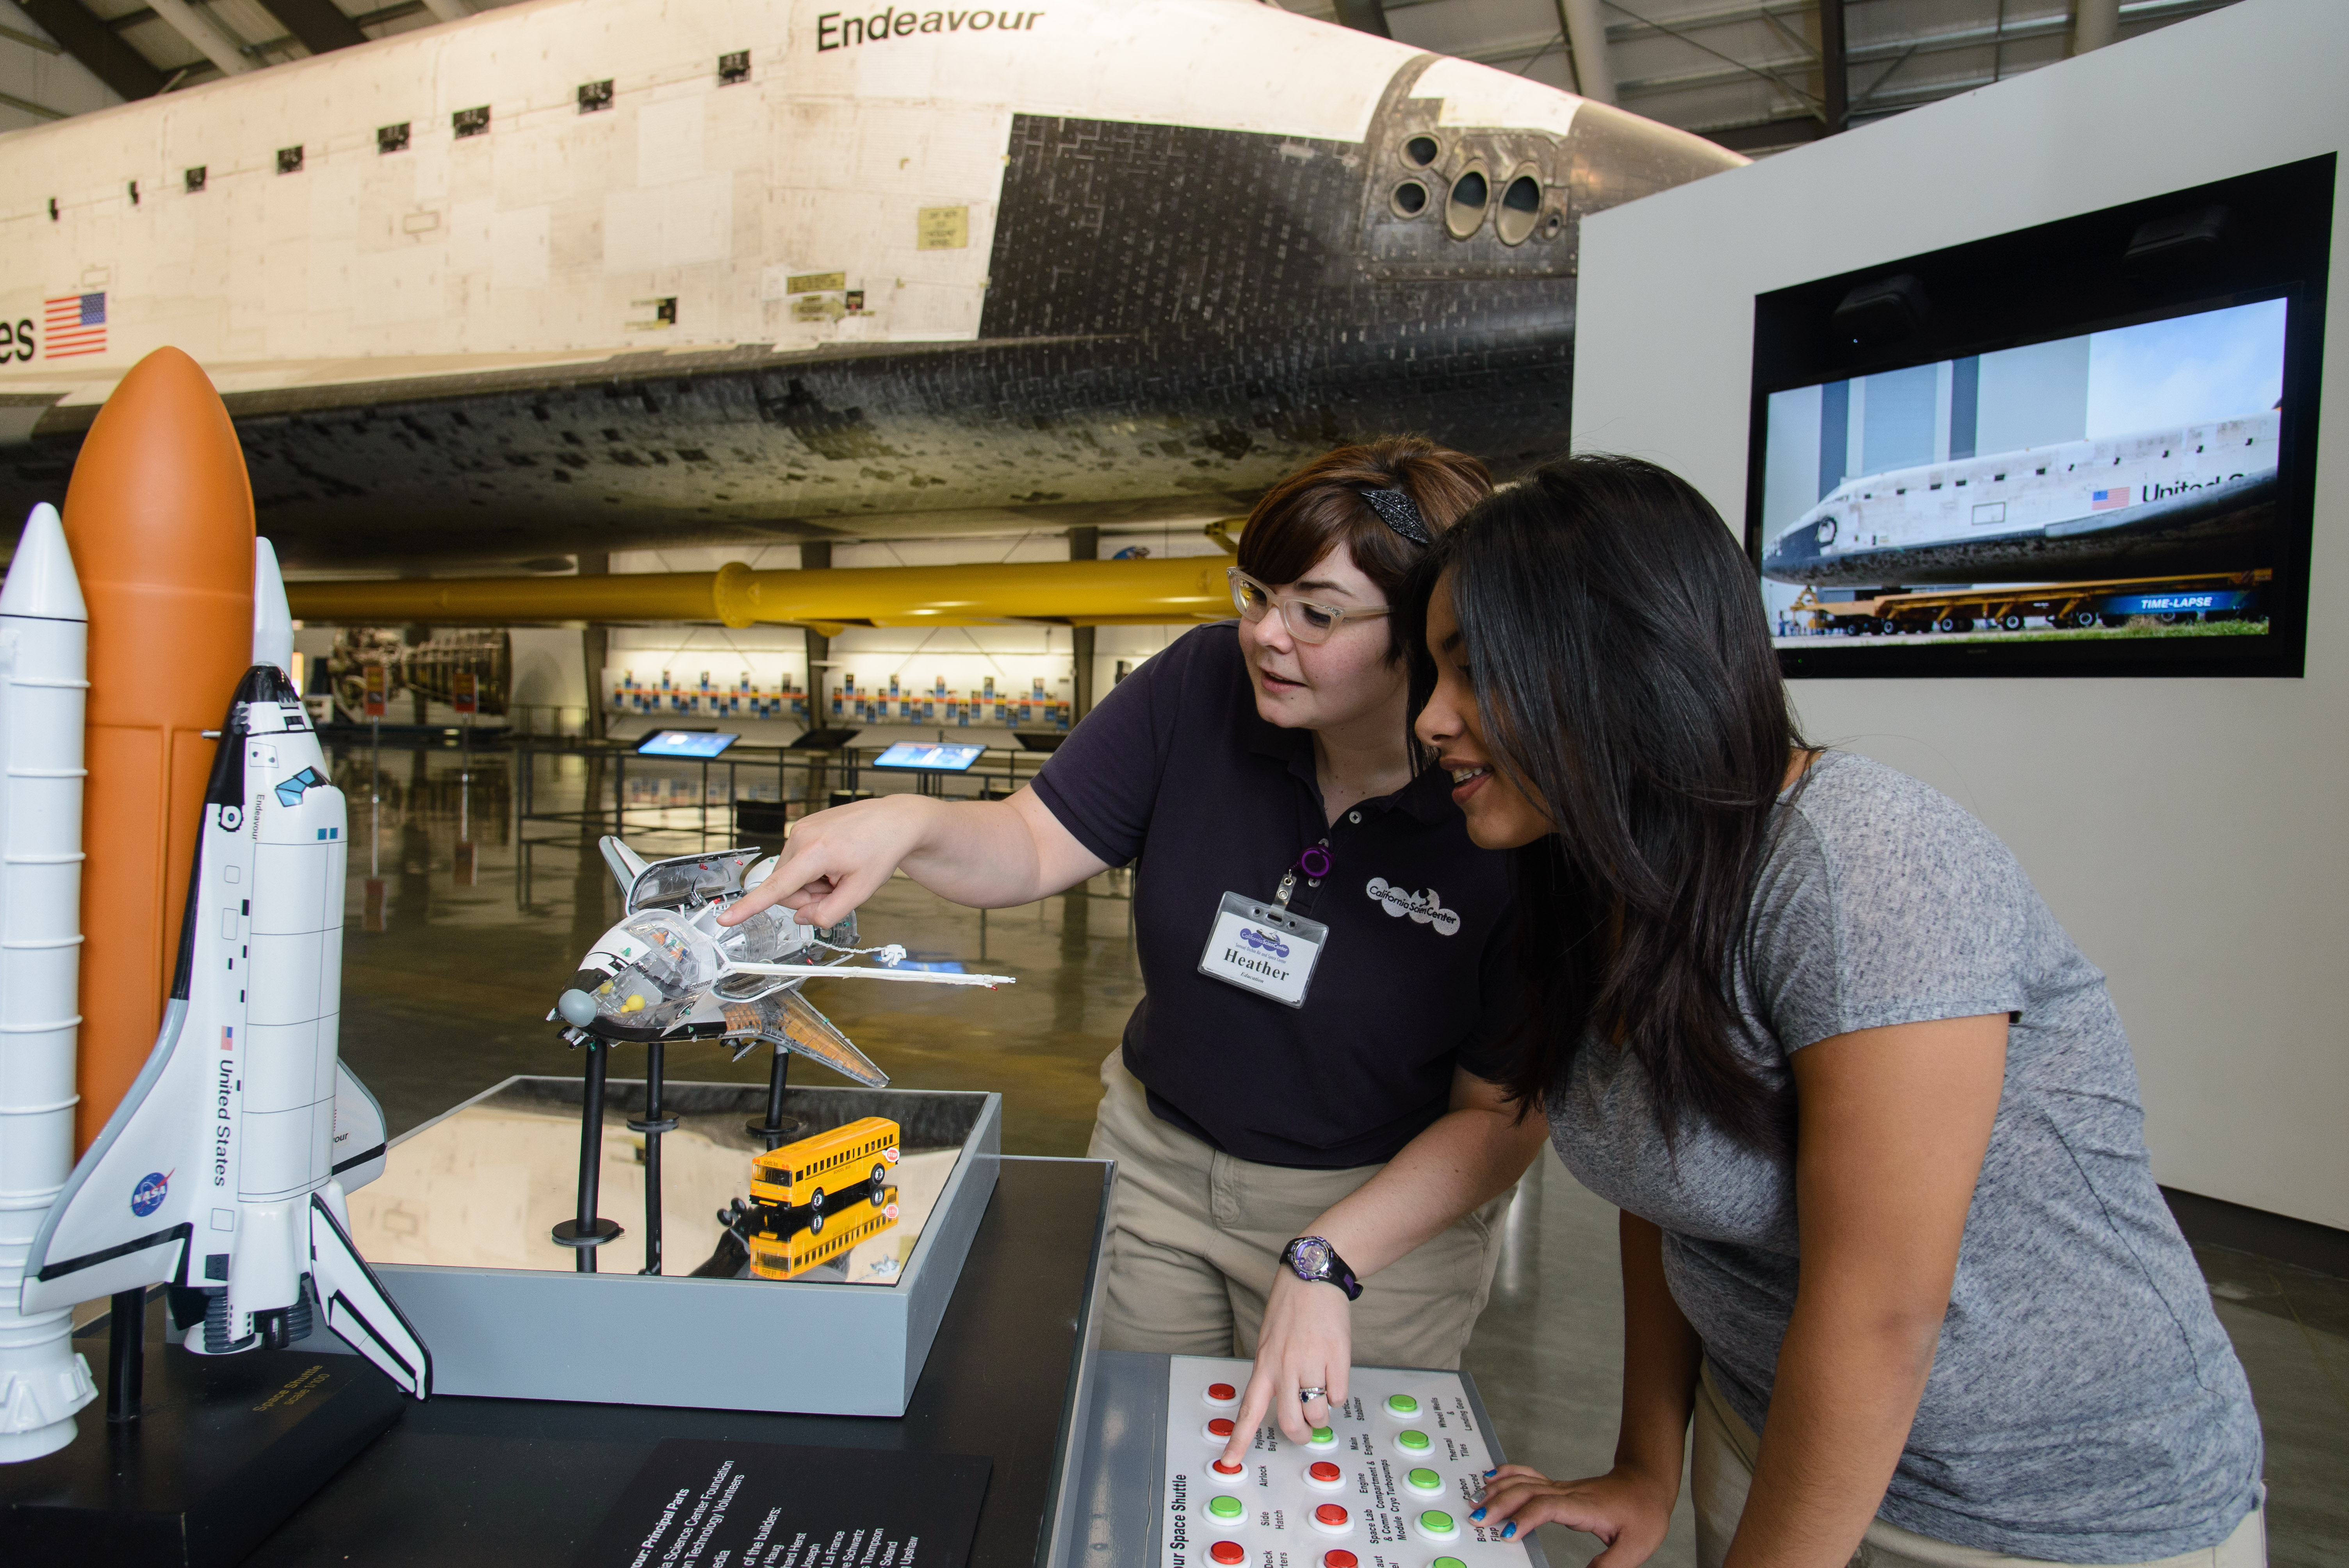 Education staff member points to small-scale model space shuttle with open payload bay as guest observes in the Samuel Oschin Pavilion with space shuttle Endeavour in the background